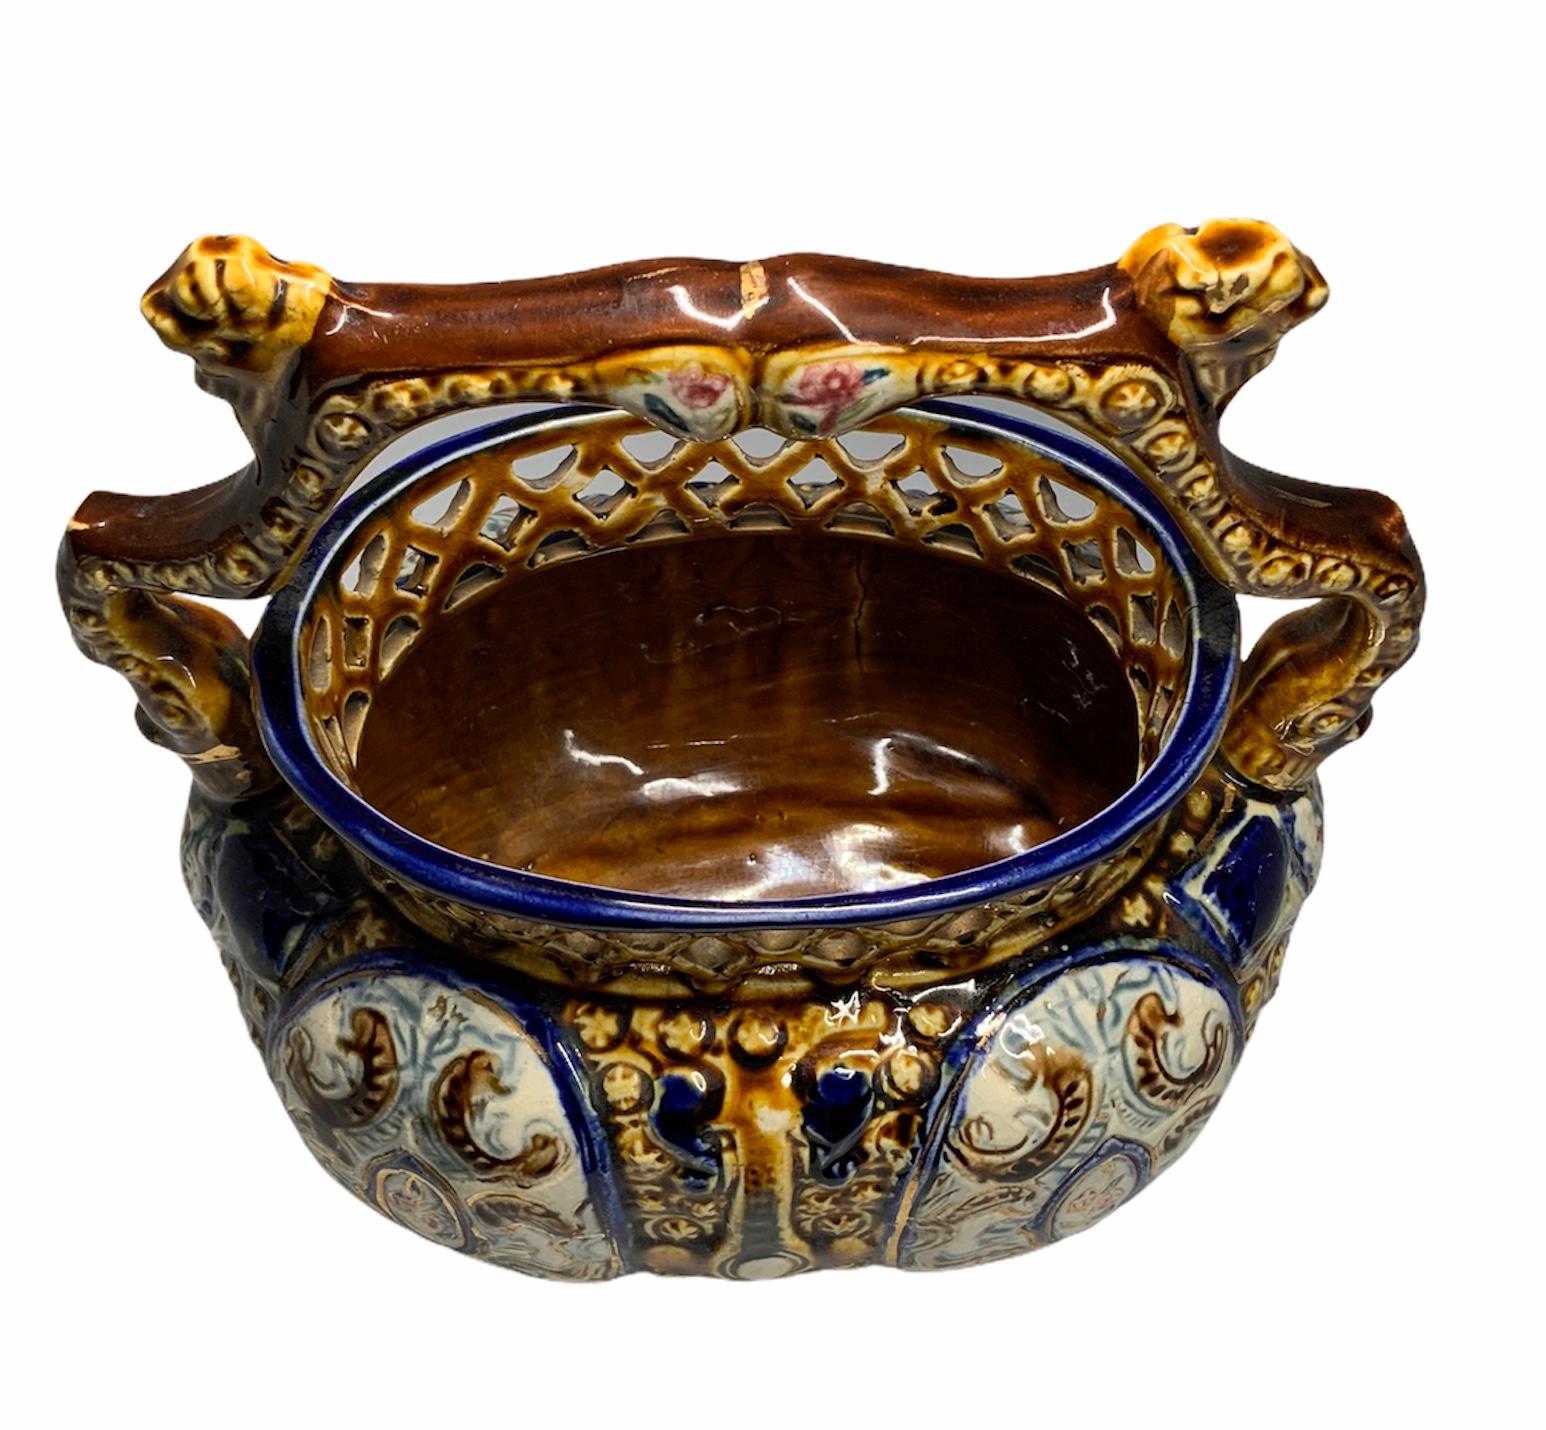 This is an English Majolica oval bulbous shaped basket. It is hand painted with bright cobalt blue, brown and white. It is decorated with C- shaped scrolls and some cameo of roses. The upper border is adorned with a pierced diamonds net. A brown